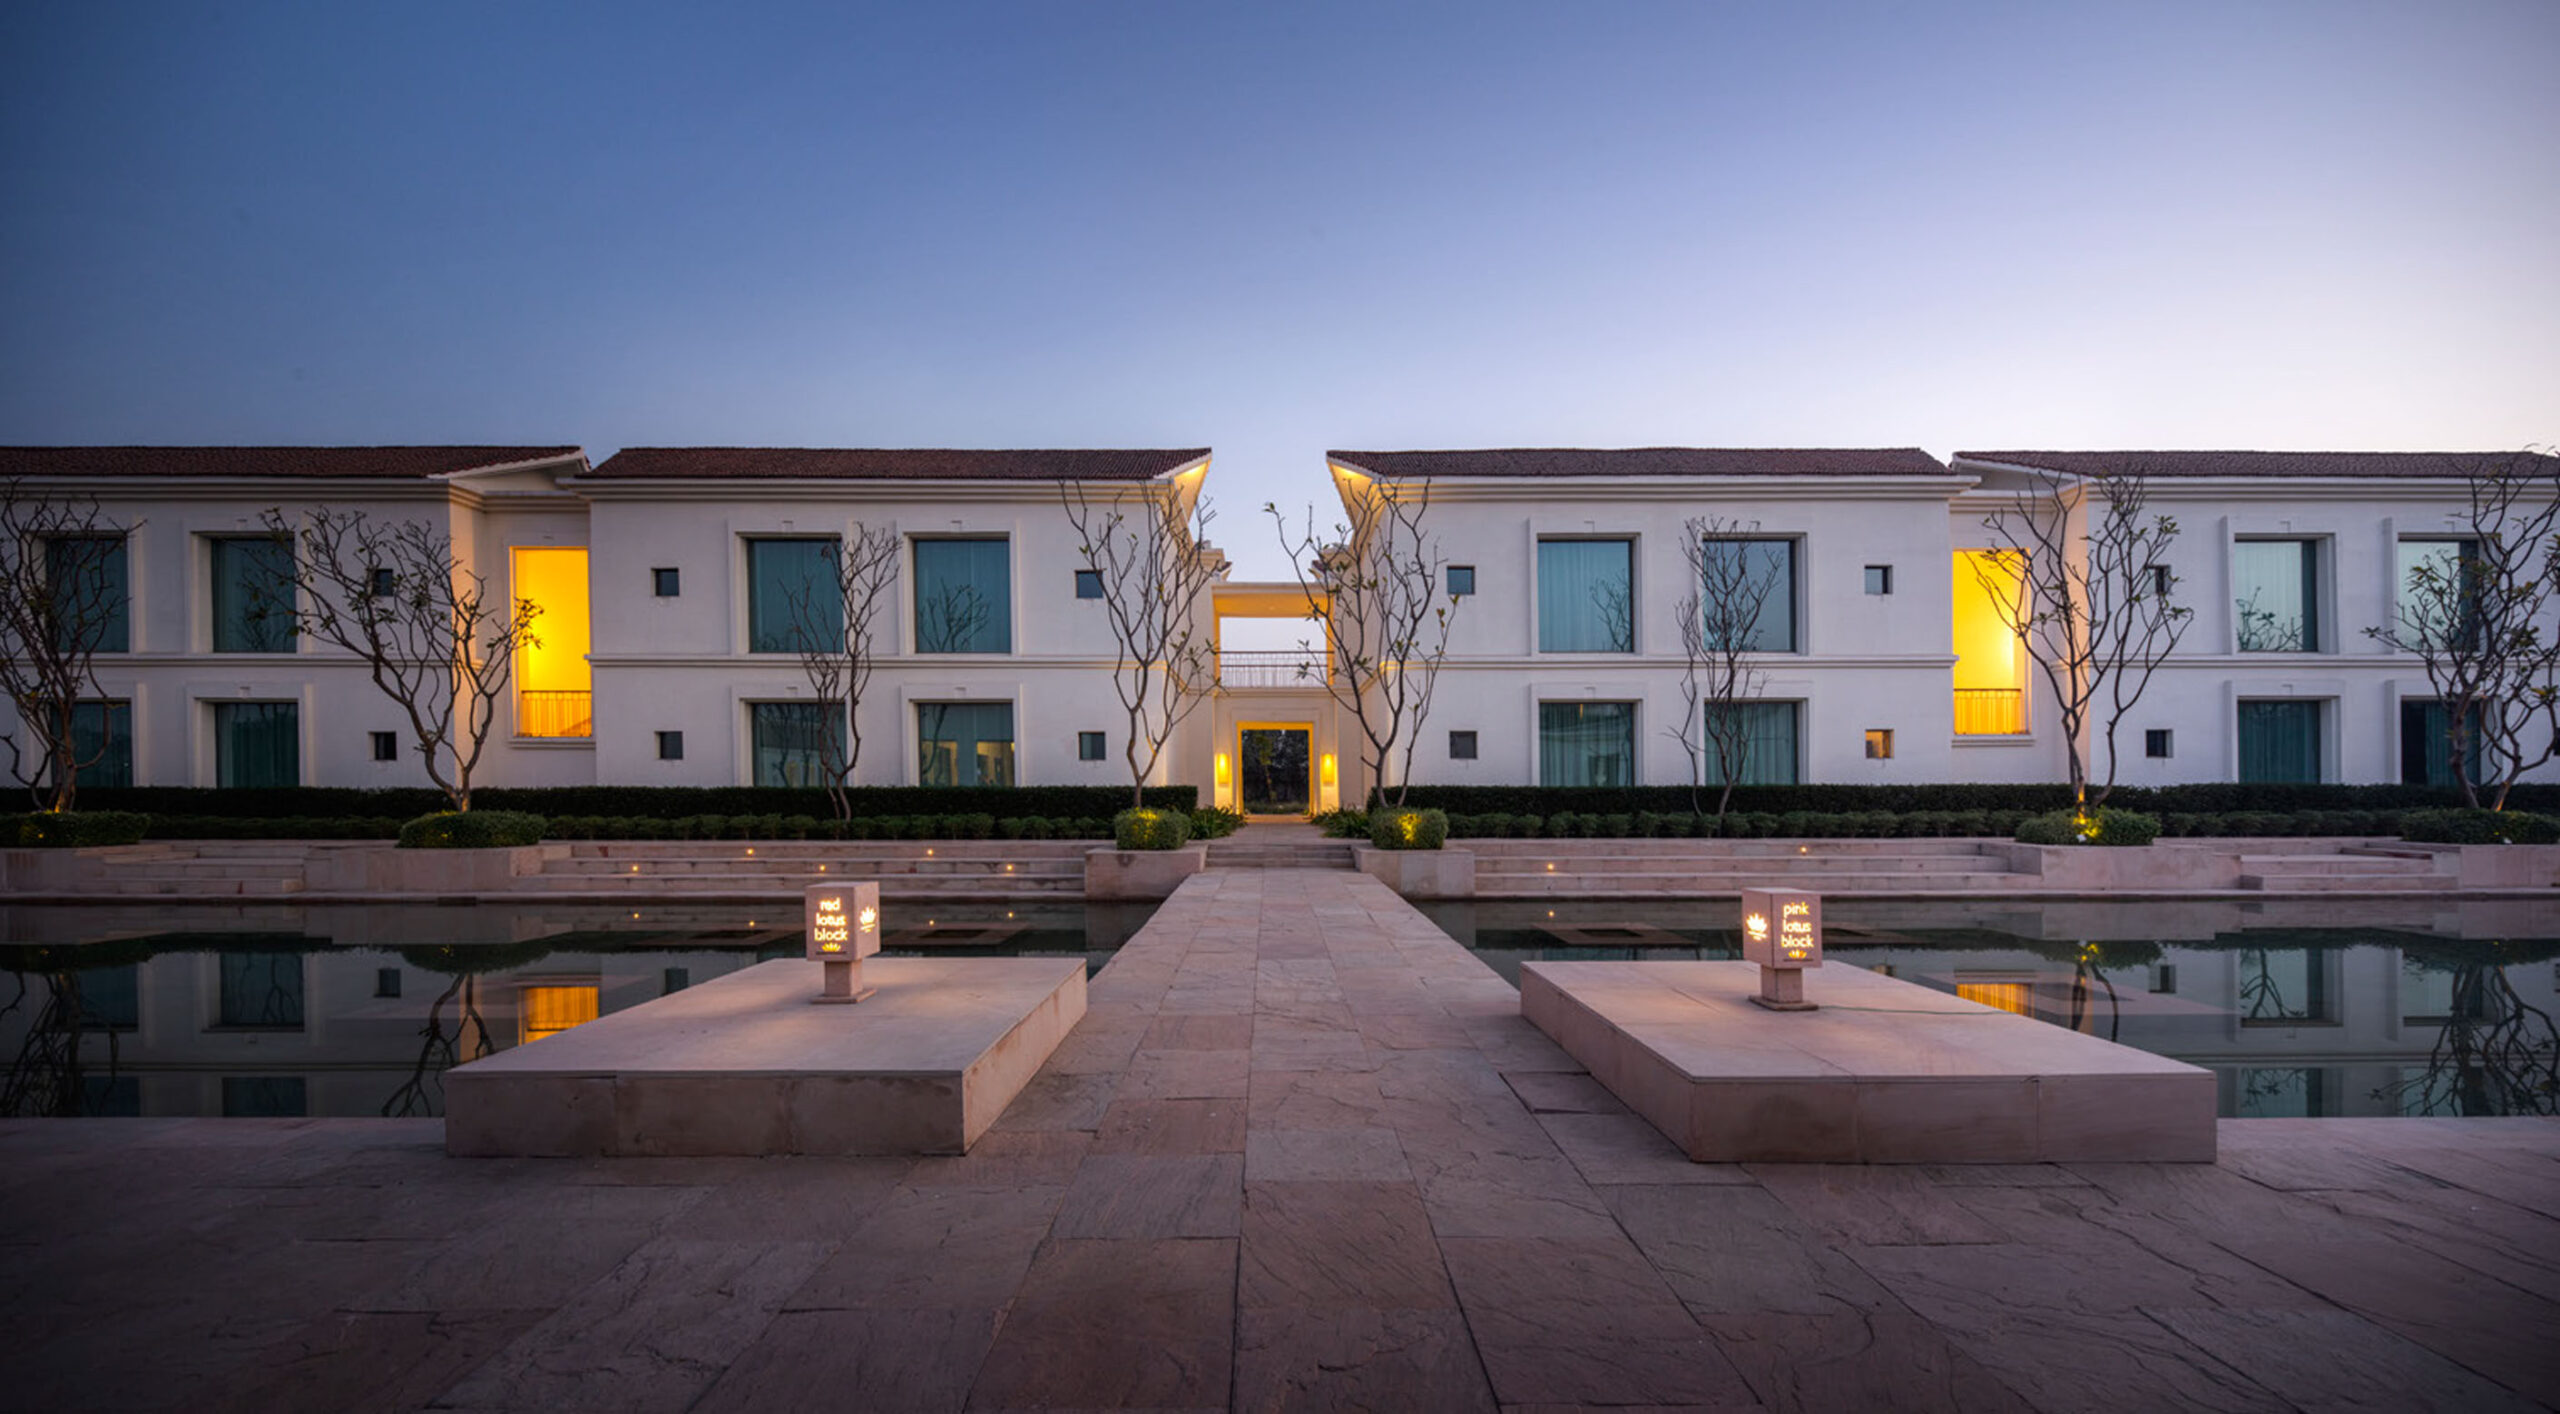 Architectural serenity a reverent ode to Buddhism at the hotel in Bodh Gaya